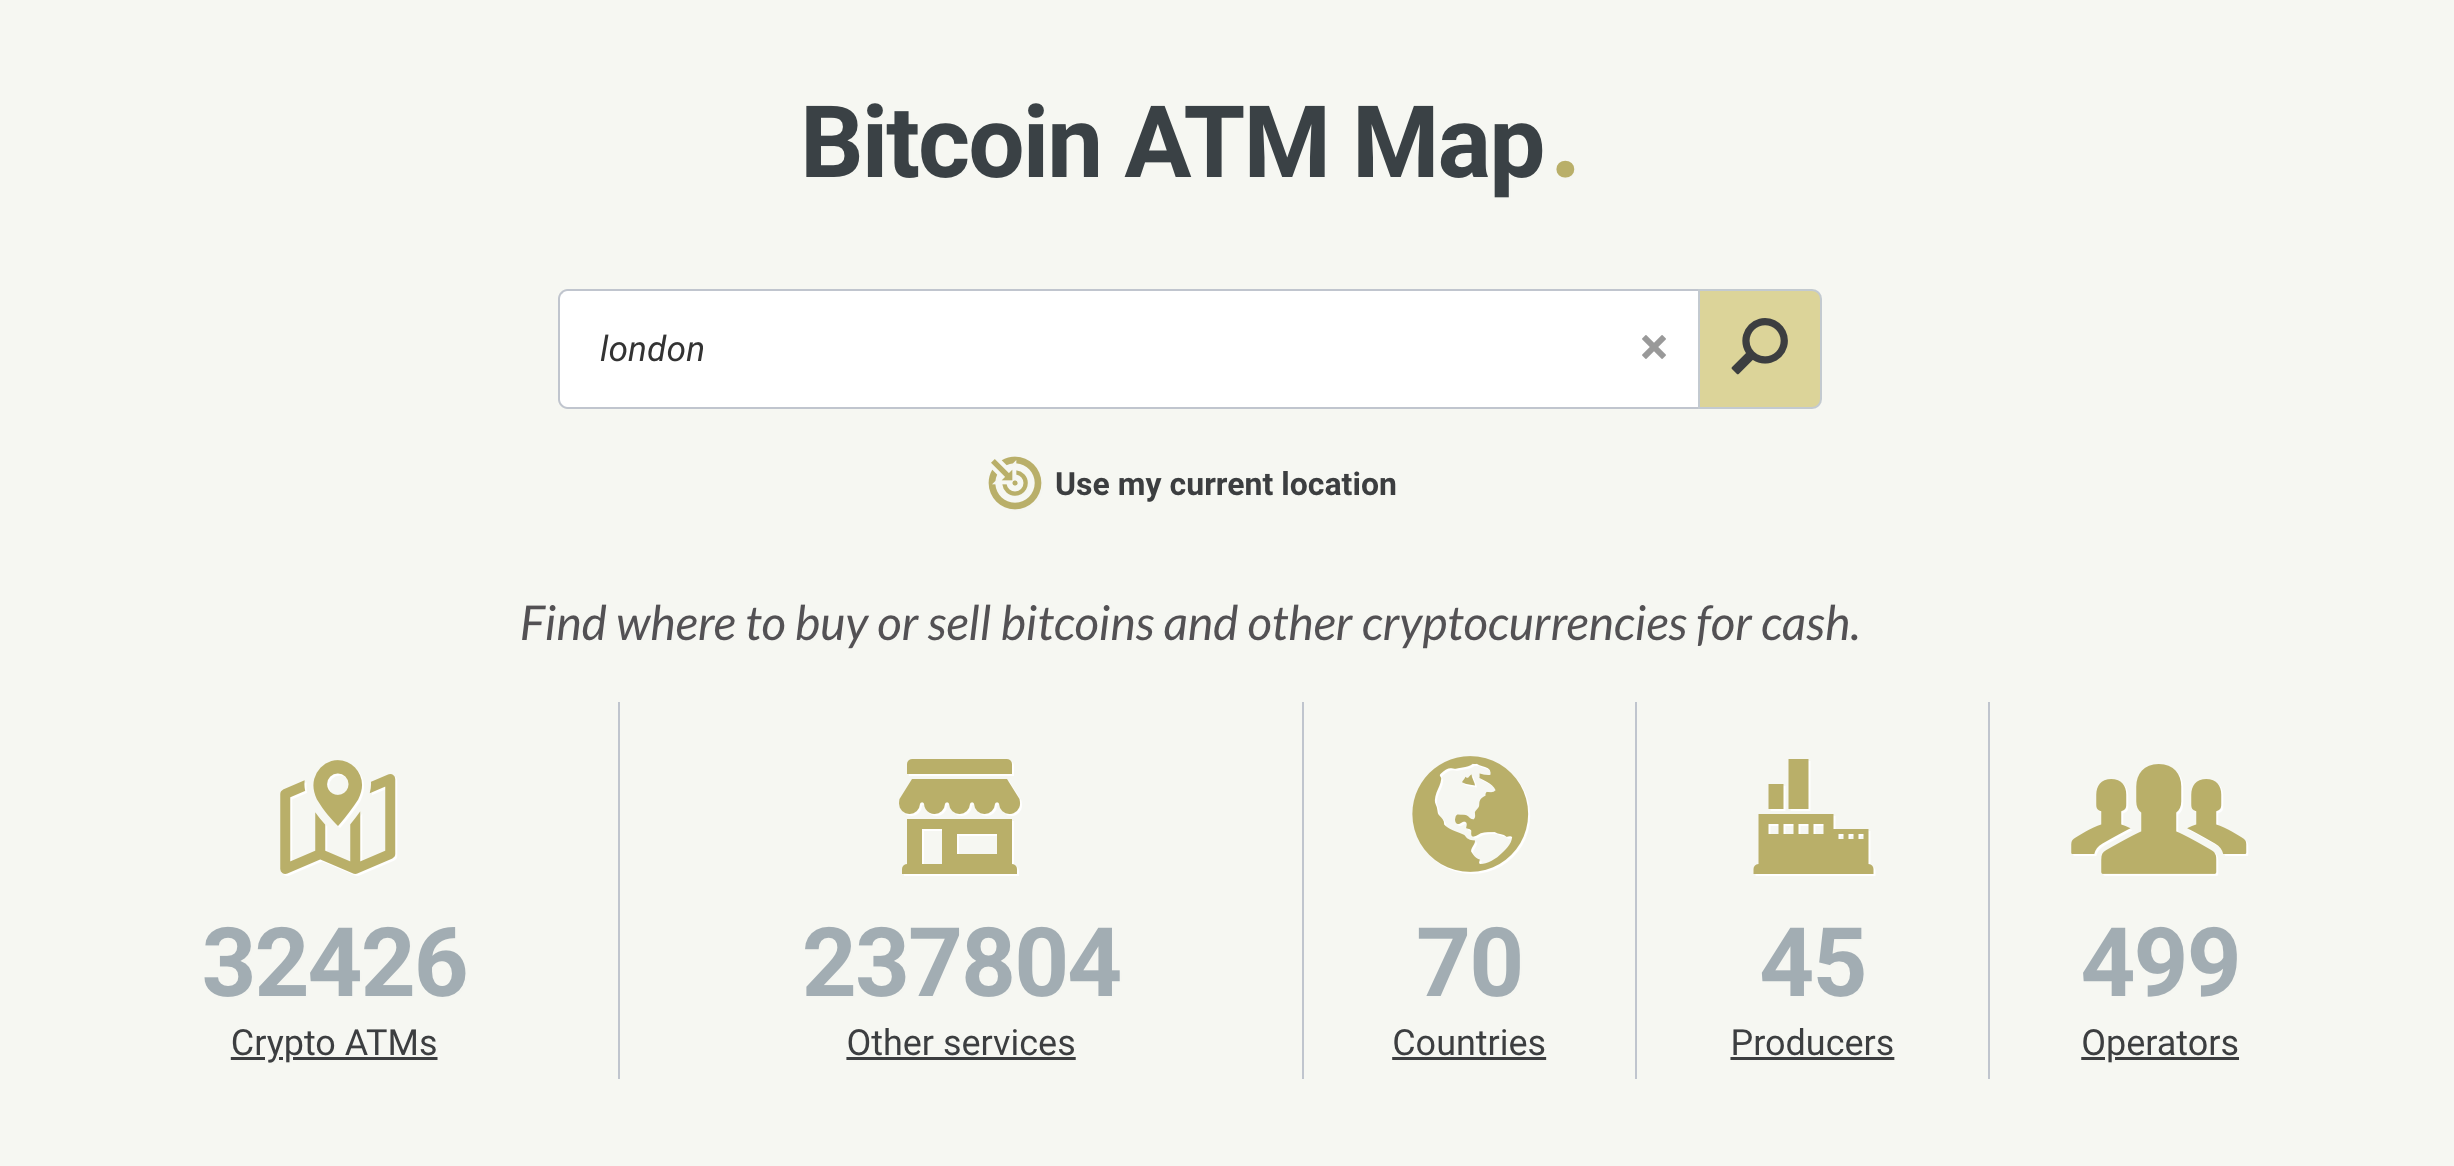 How to Buy Bitcoins Completely Anonymously